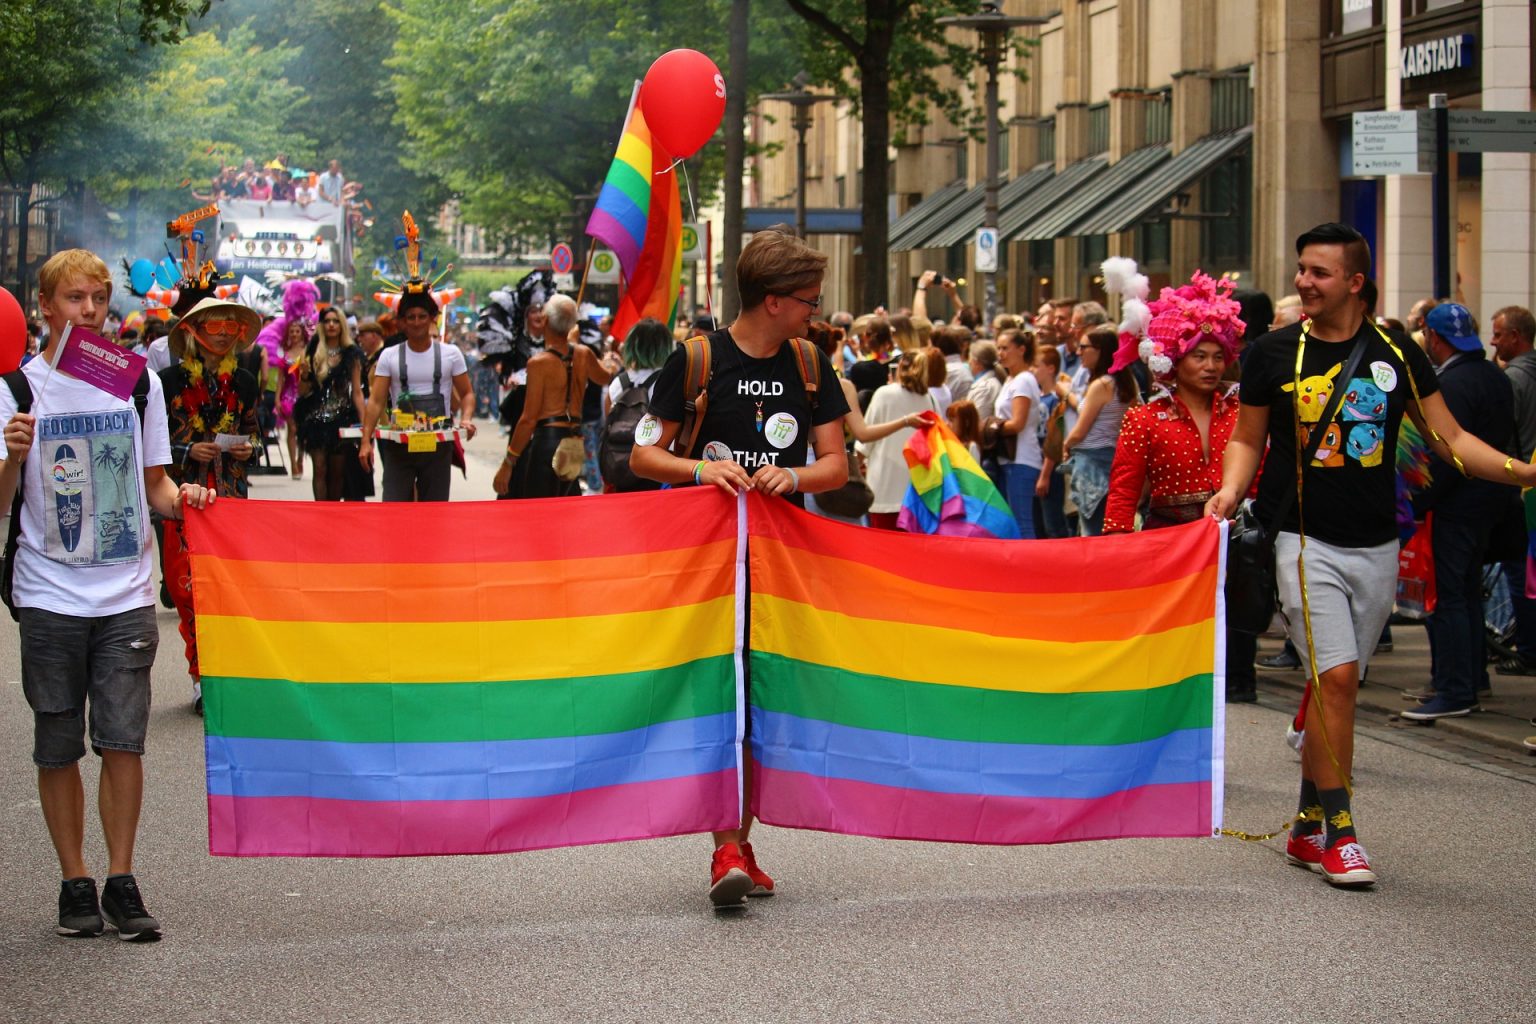 Three young people hold a pride flag in an LGBTQ pride march